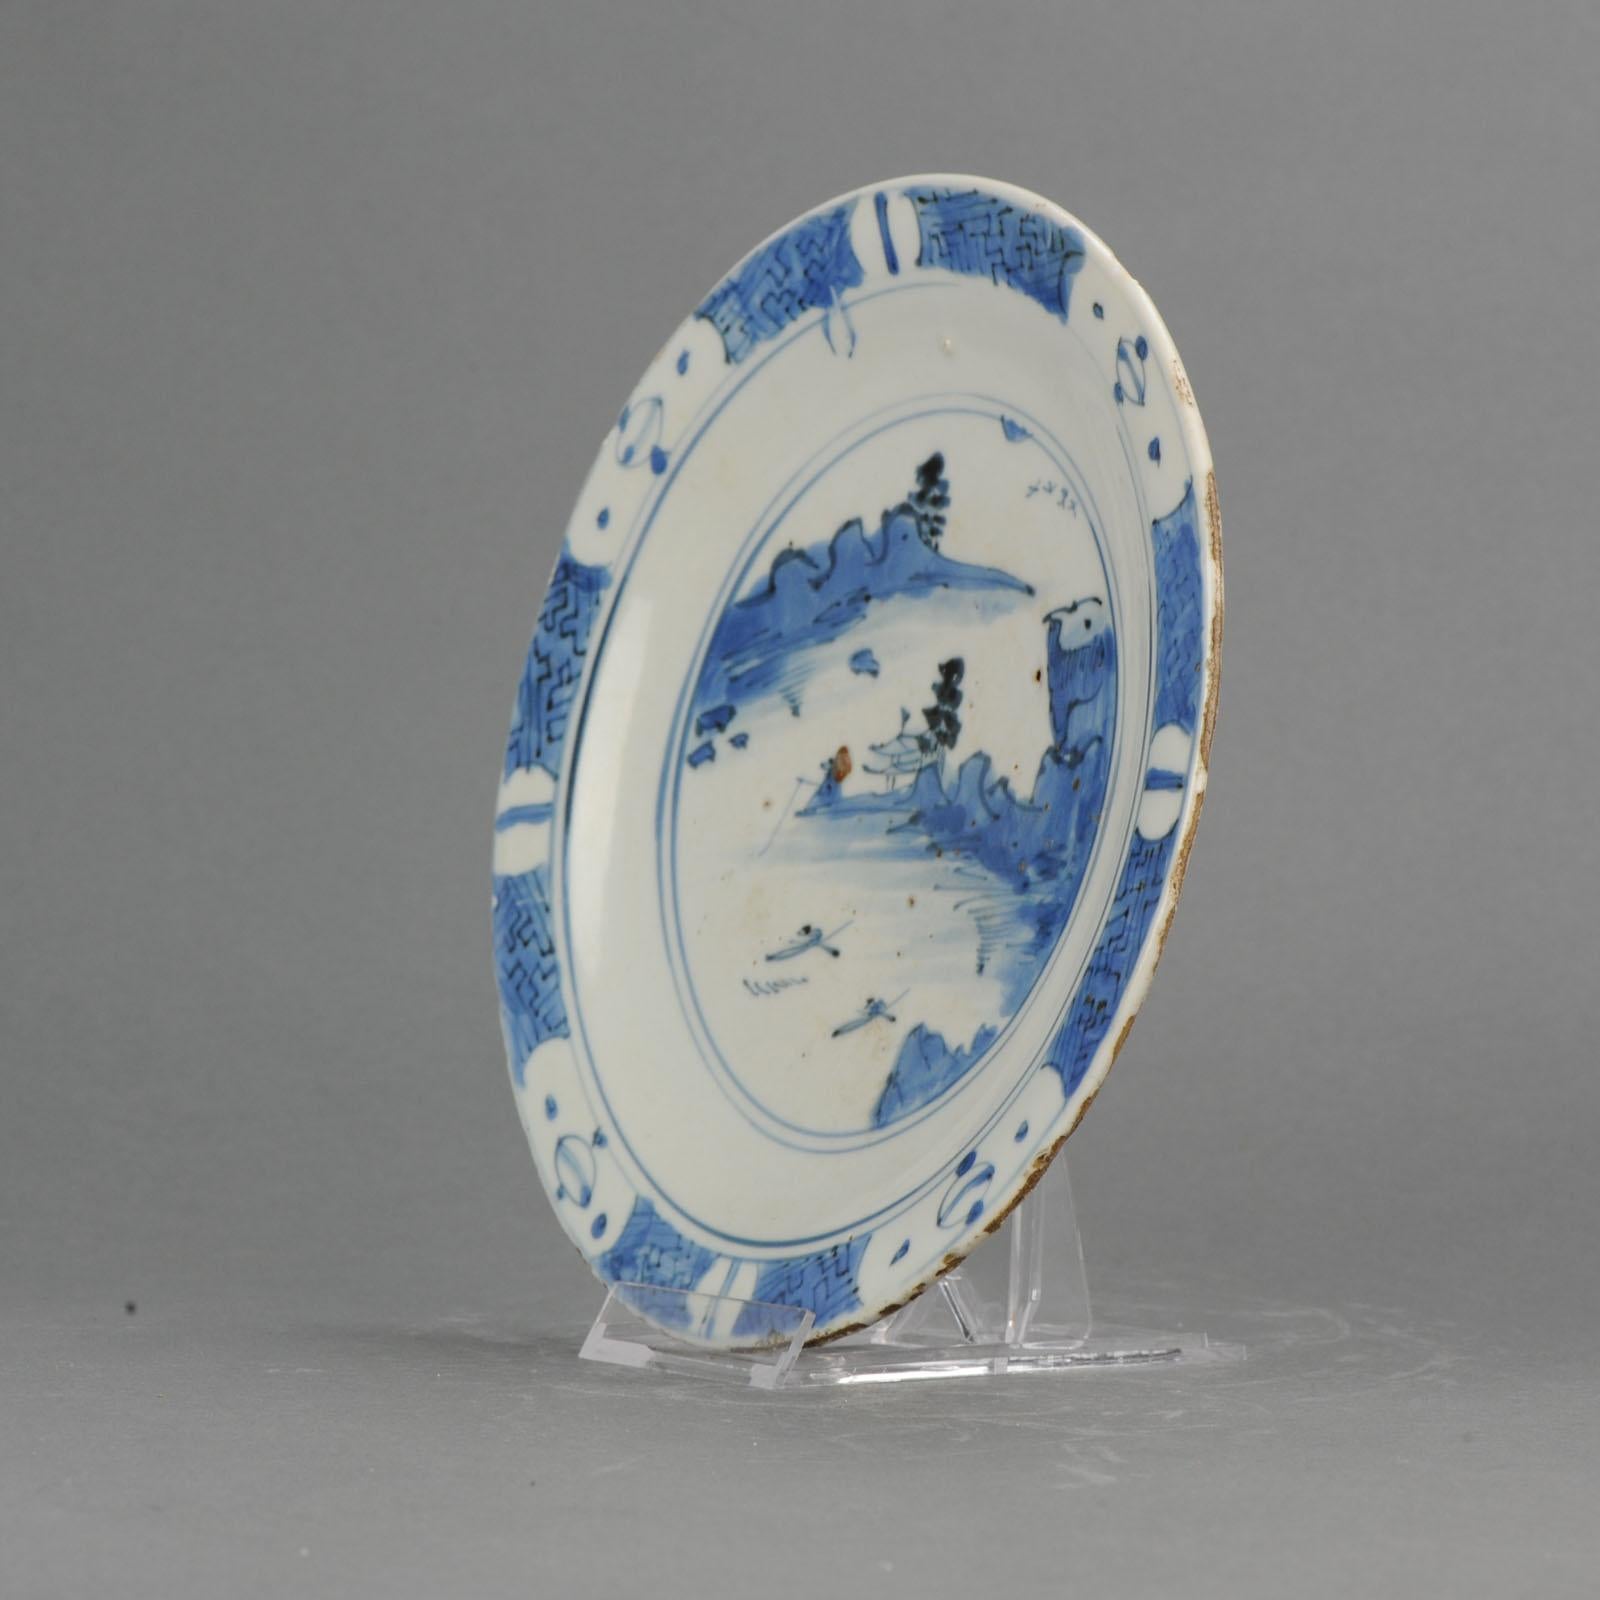 A rare Shoki-Imari porcelain dish, Arita Kilns circa 1630-1640. This flat dish with everted rim and its thick rough foot-rim is typical of some of the earliest Japanese porcelain ever produced. The dish is thickly potted and the glaze crazed, both